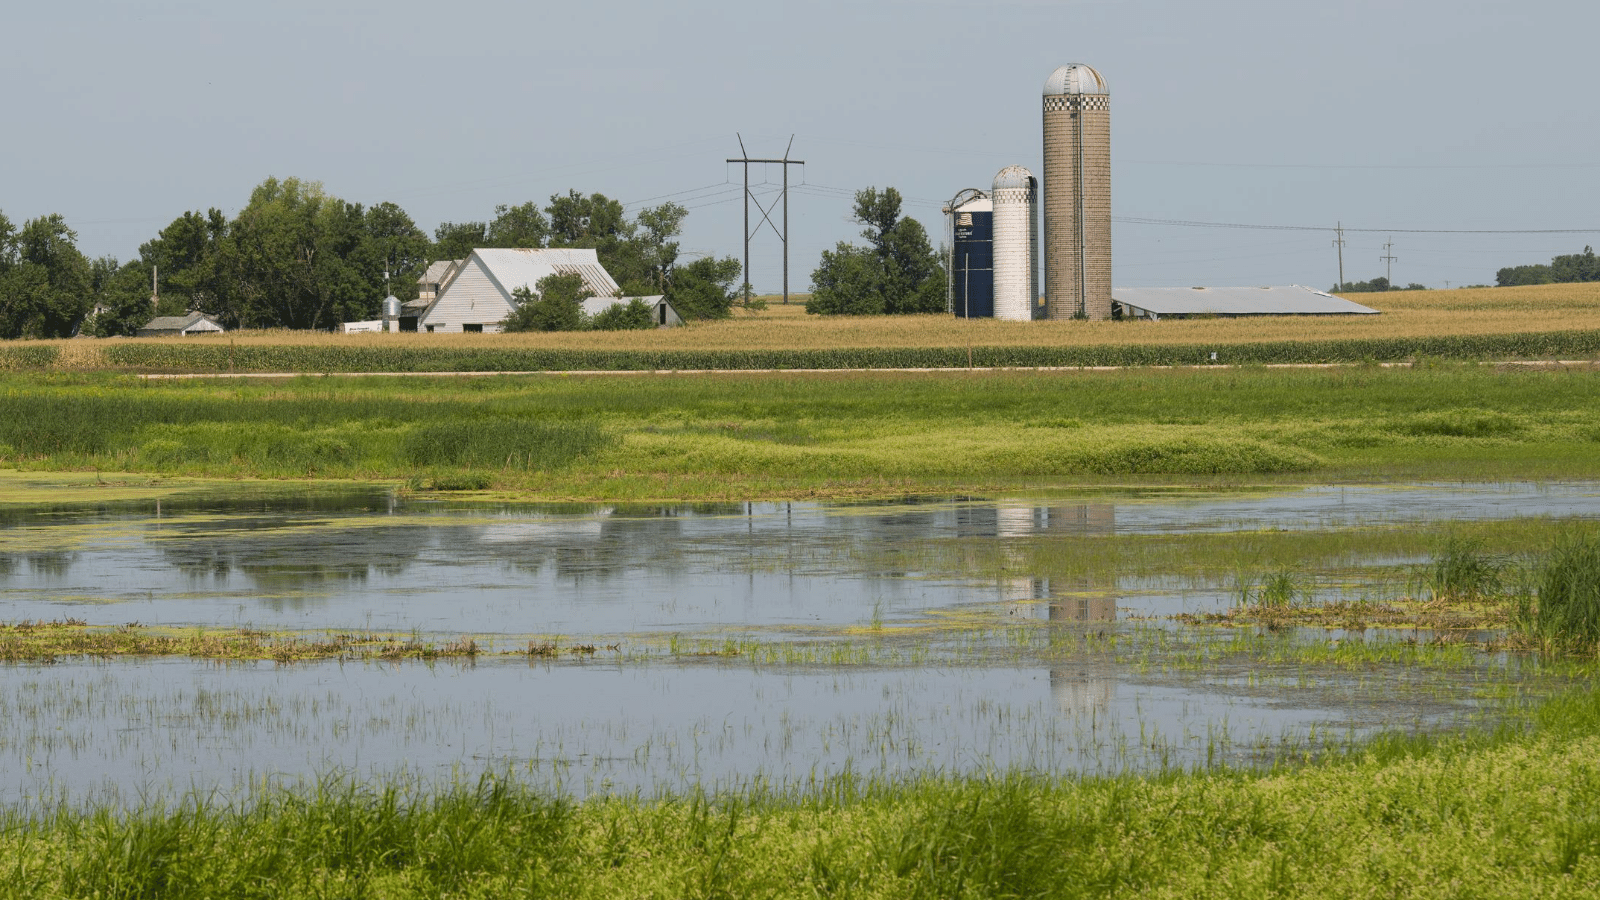 A farmstead is pictured in the distance with a marsh in